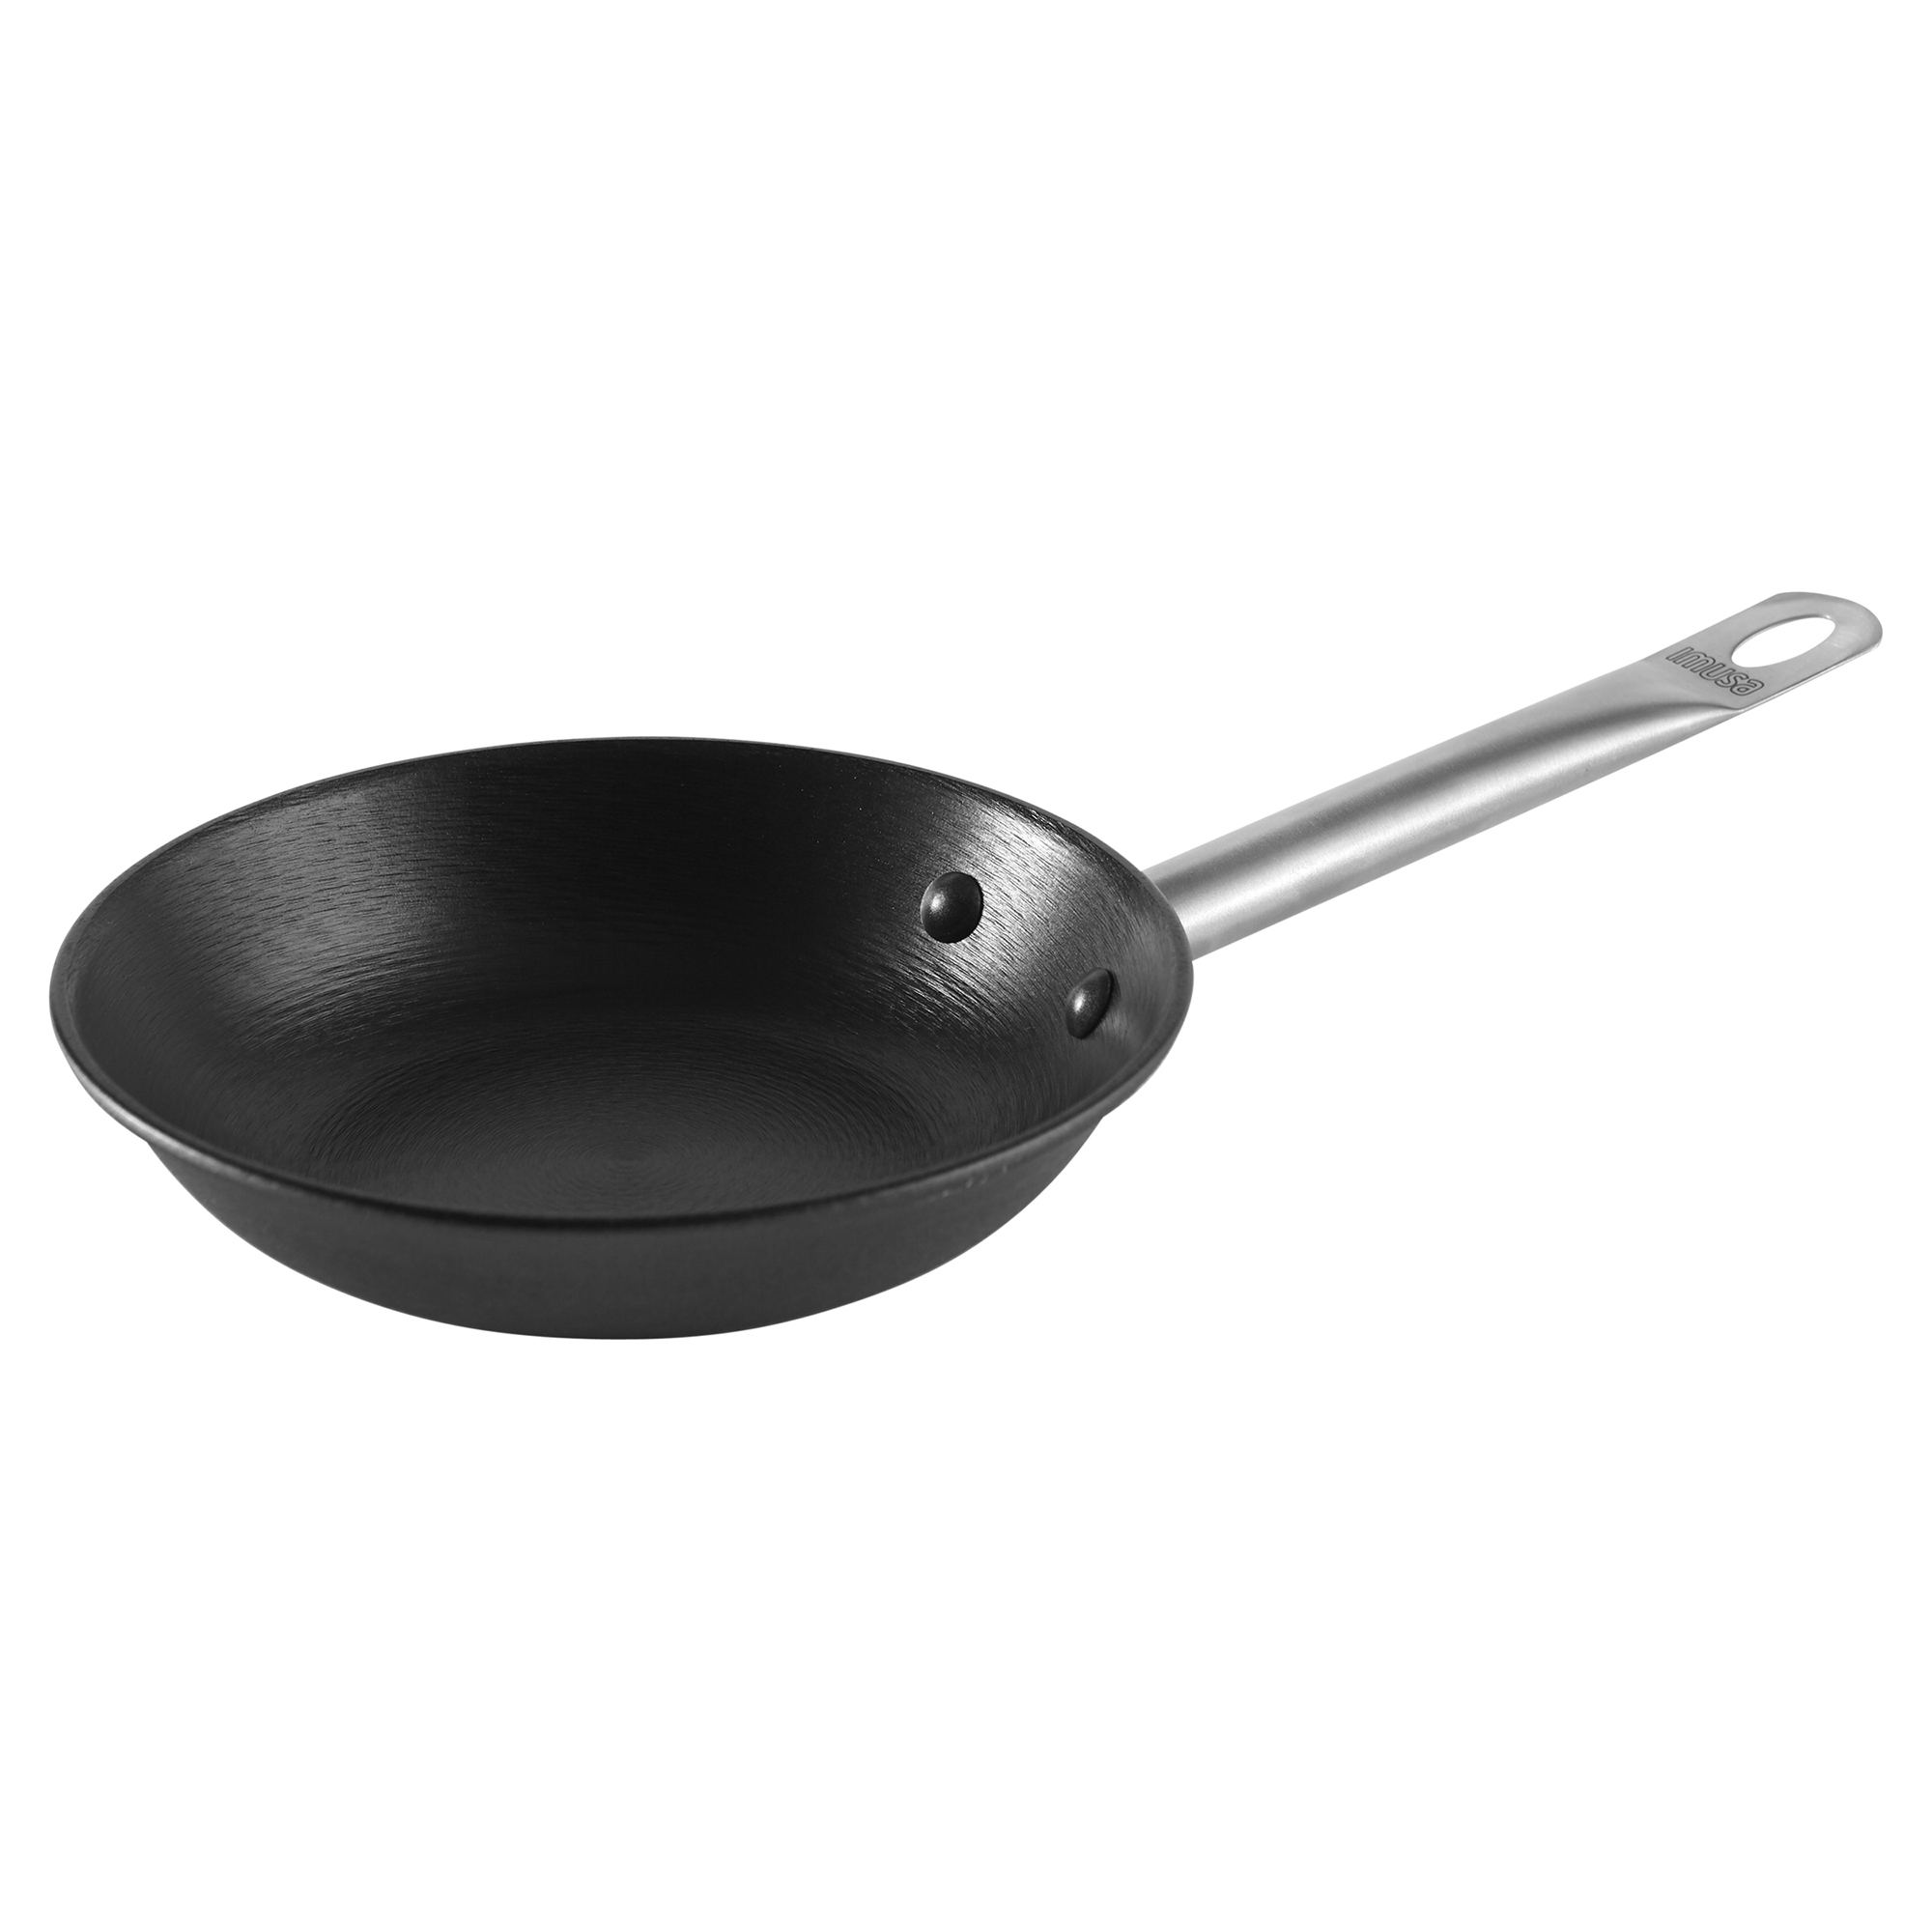 Imusa 9 Round Carbon Steel Comal with Metal Handles, Black